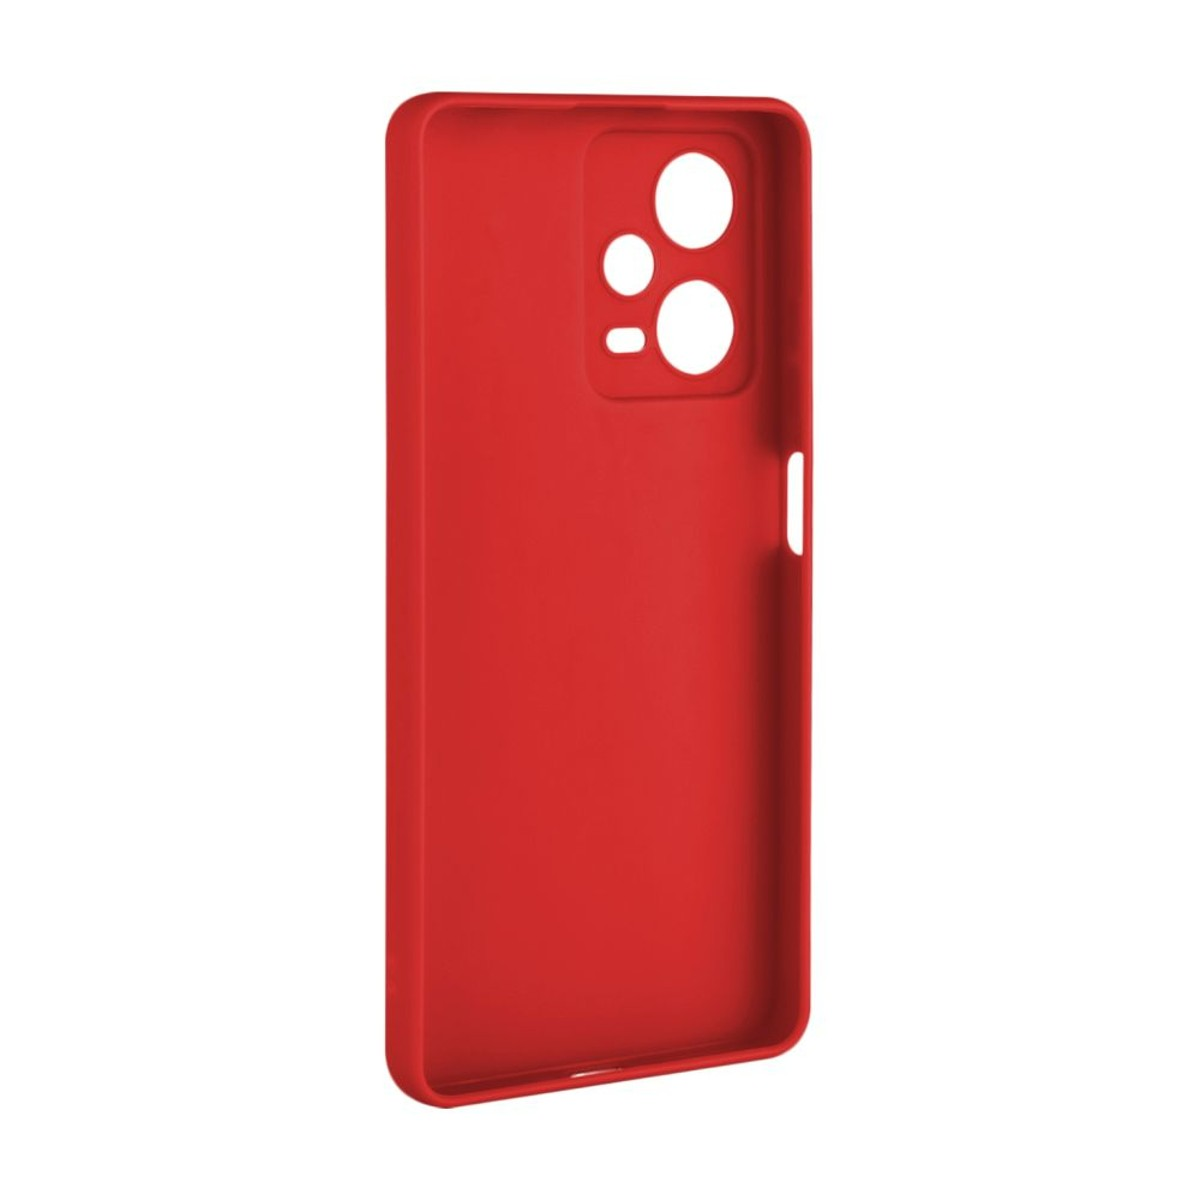 Note Backcover, Redmi Rot FIXST-1100-RD, Xiaomi, 12 5G, FIXED Pro